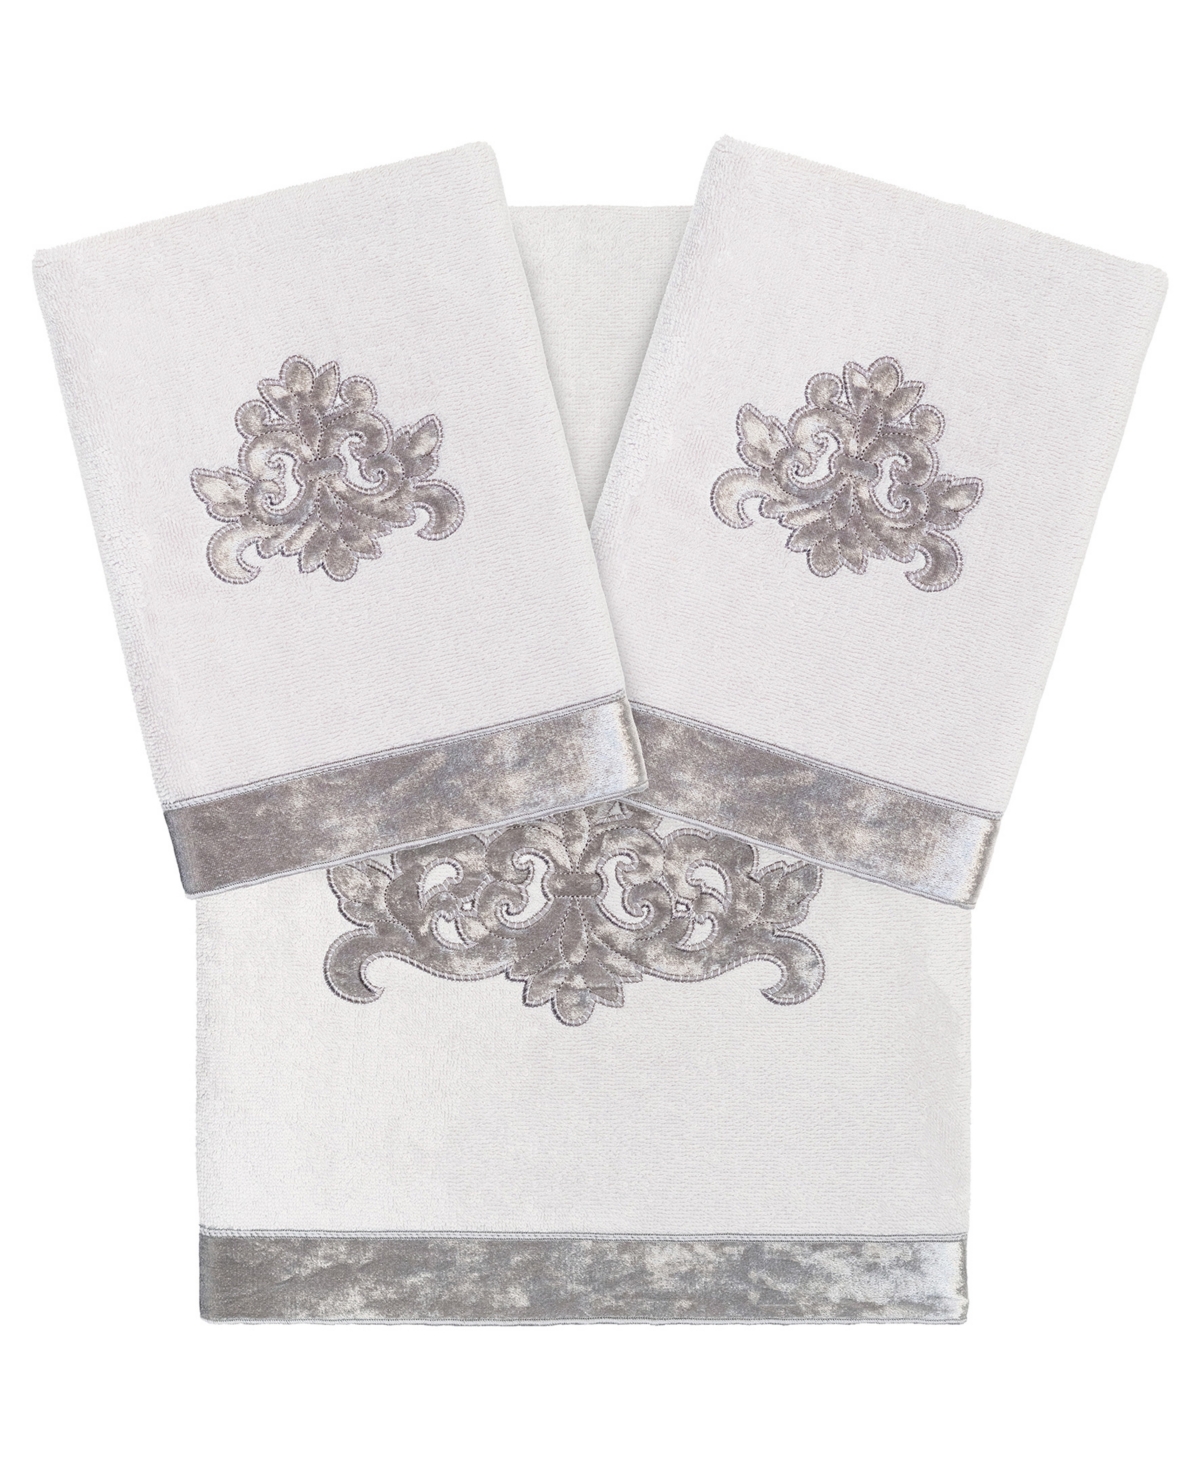 Linum Home Textiles Turkish Cotton May Embellished Towel Set, 3 Piece Bedding In Silver